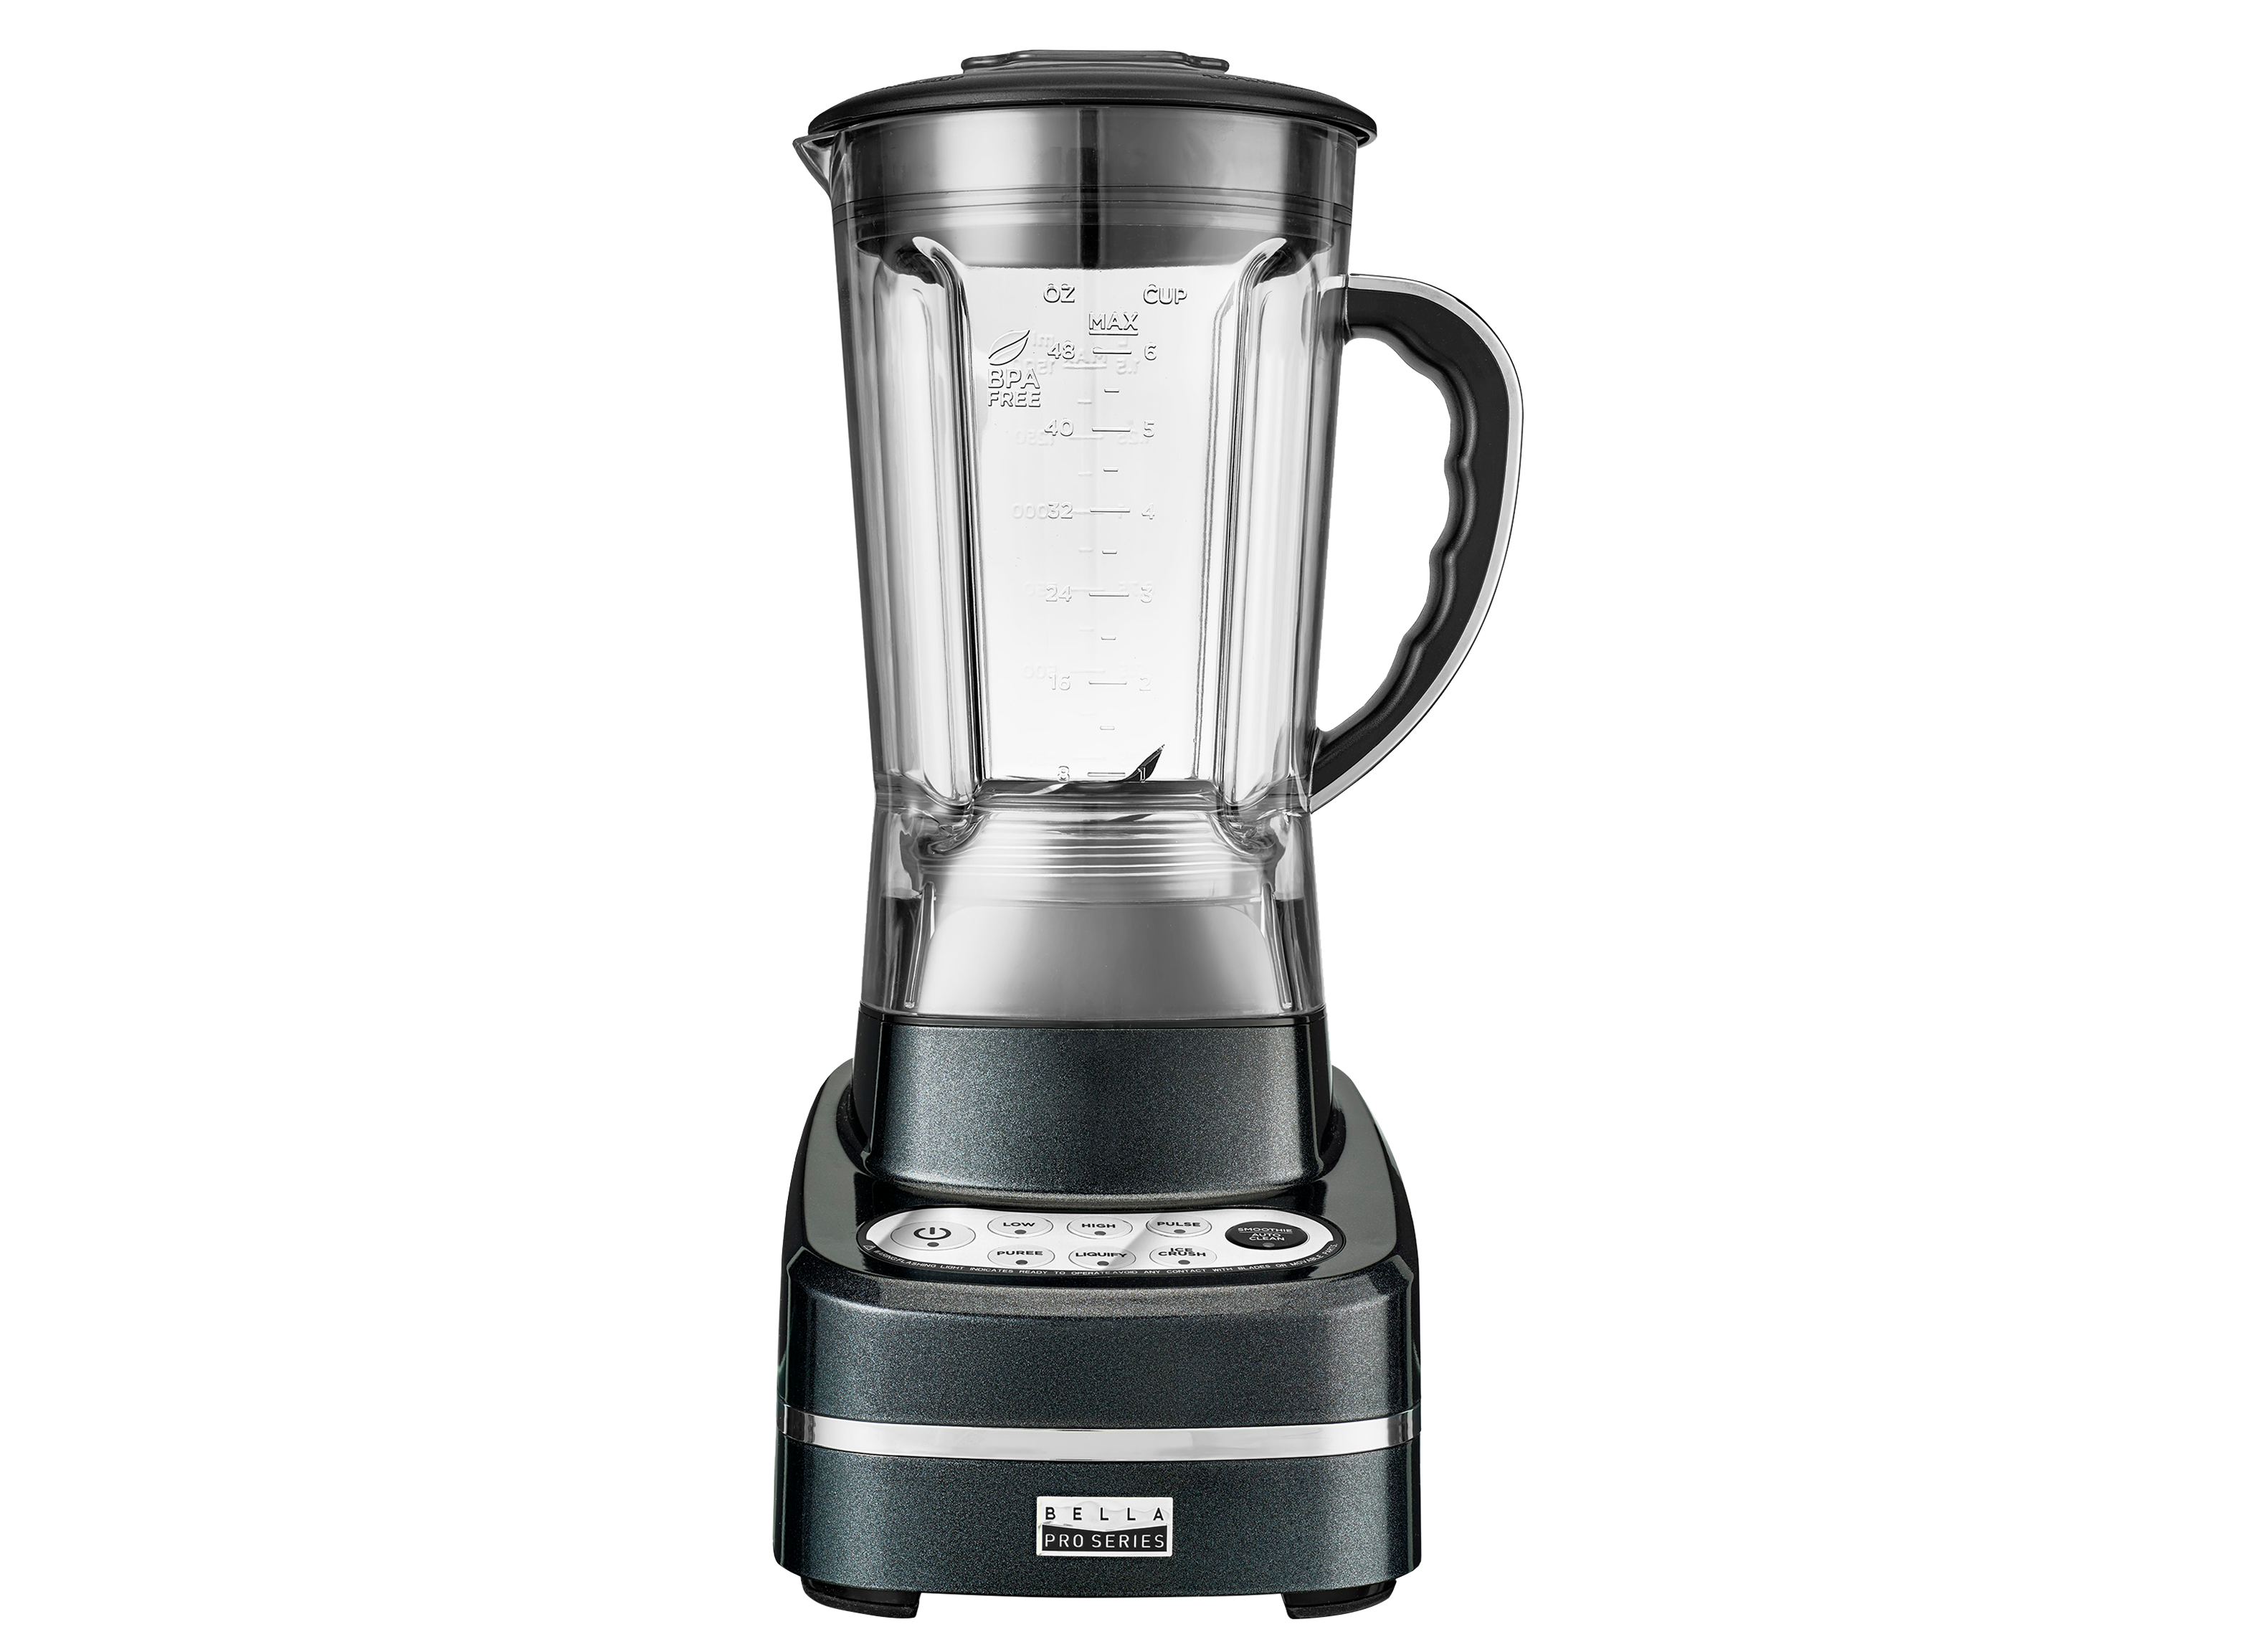 https://crdms.images.consumerreports.org/prod/products/cr/models/397636-full-sized-blenders-bella-pro-series-7-speed-90068-10002565.png